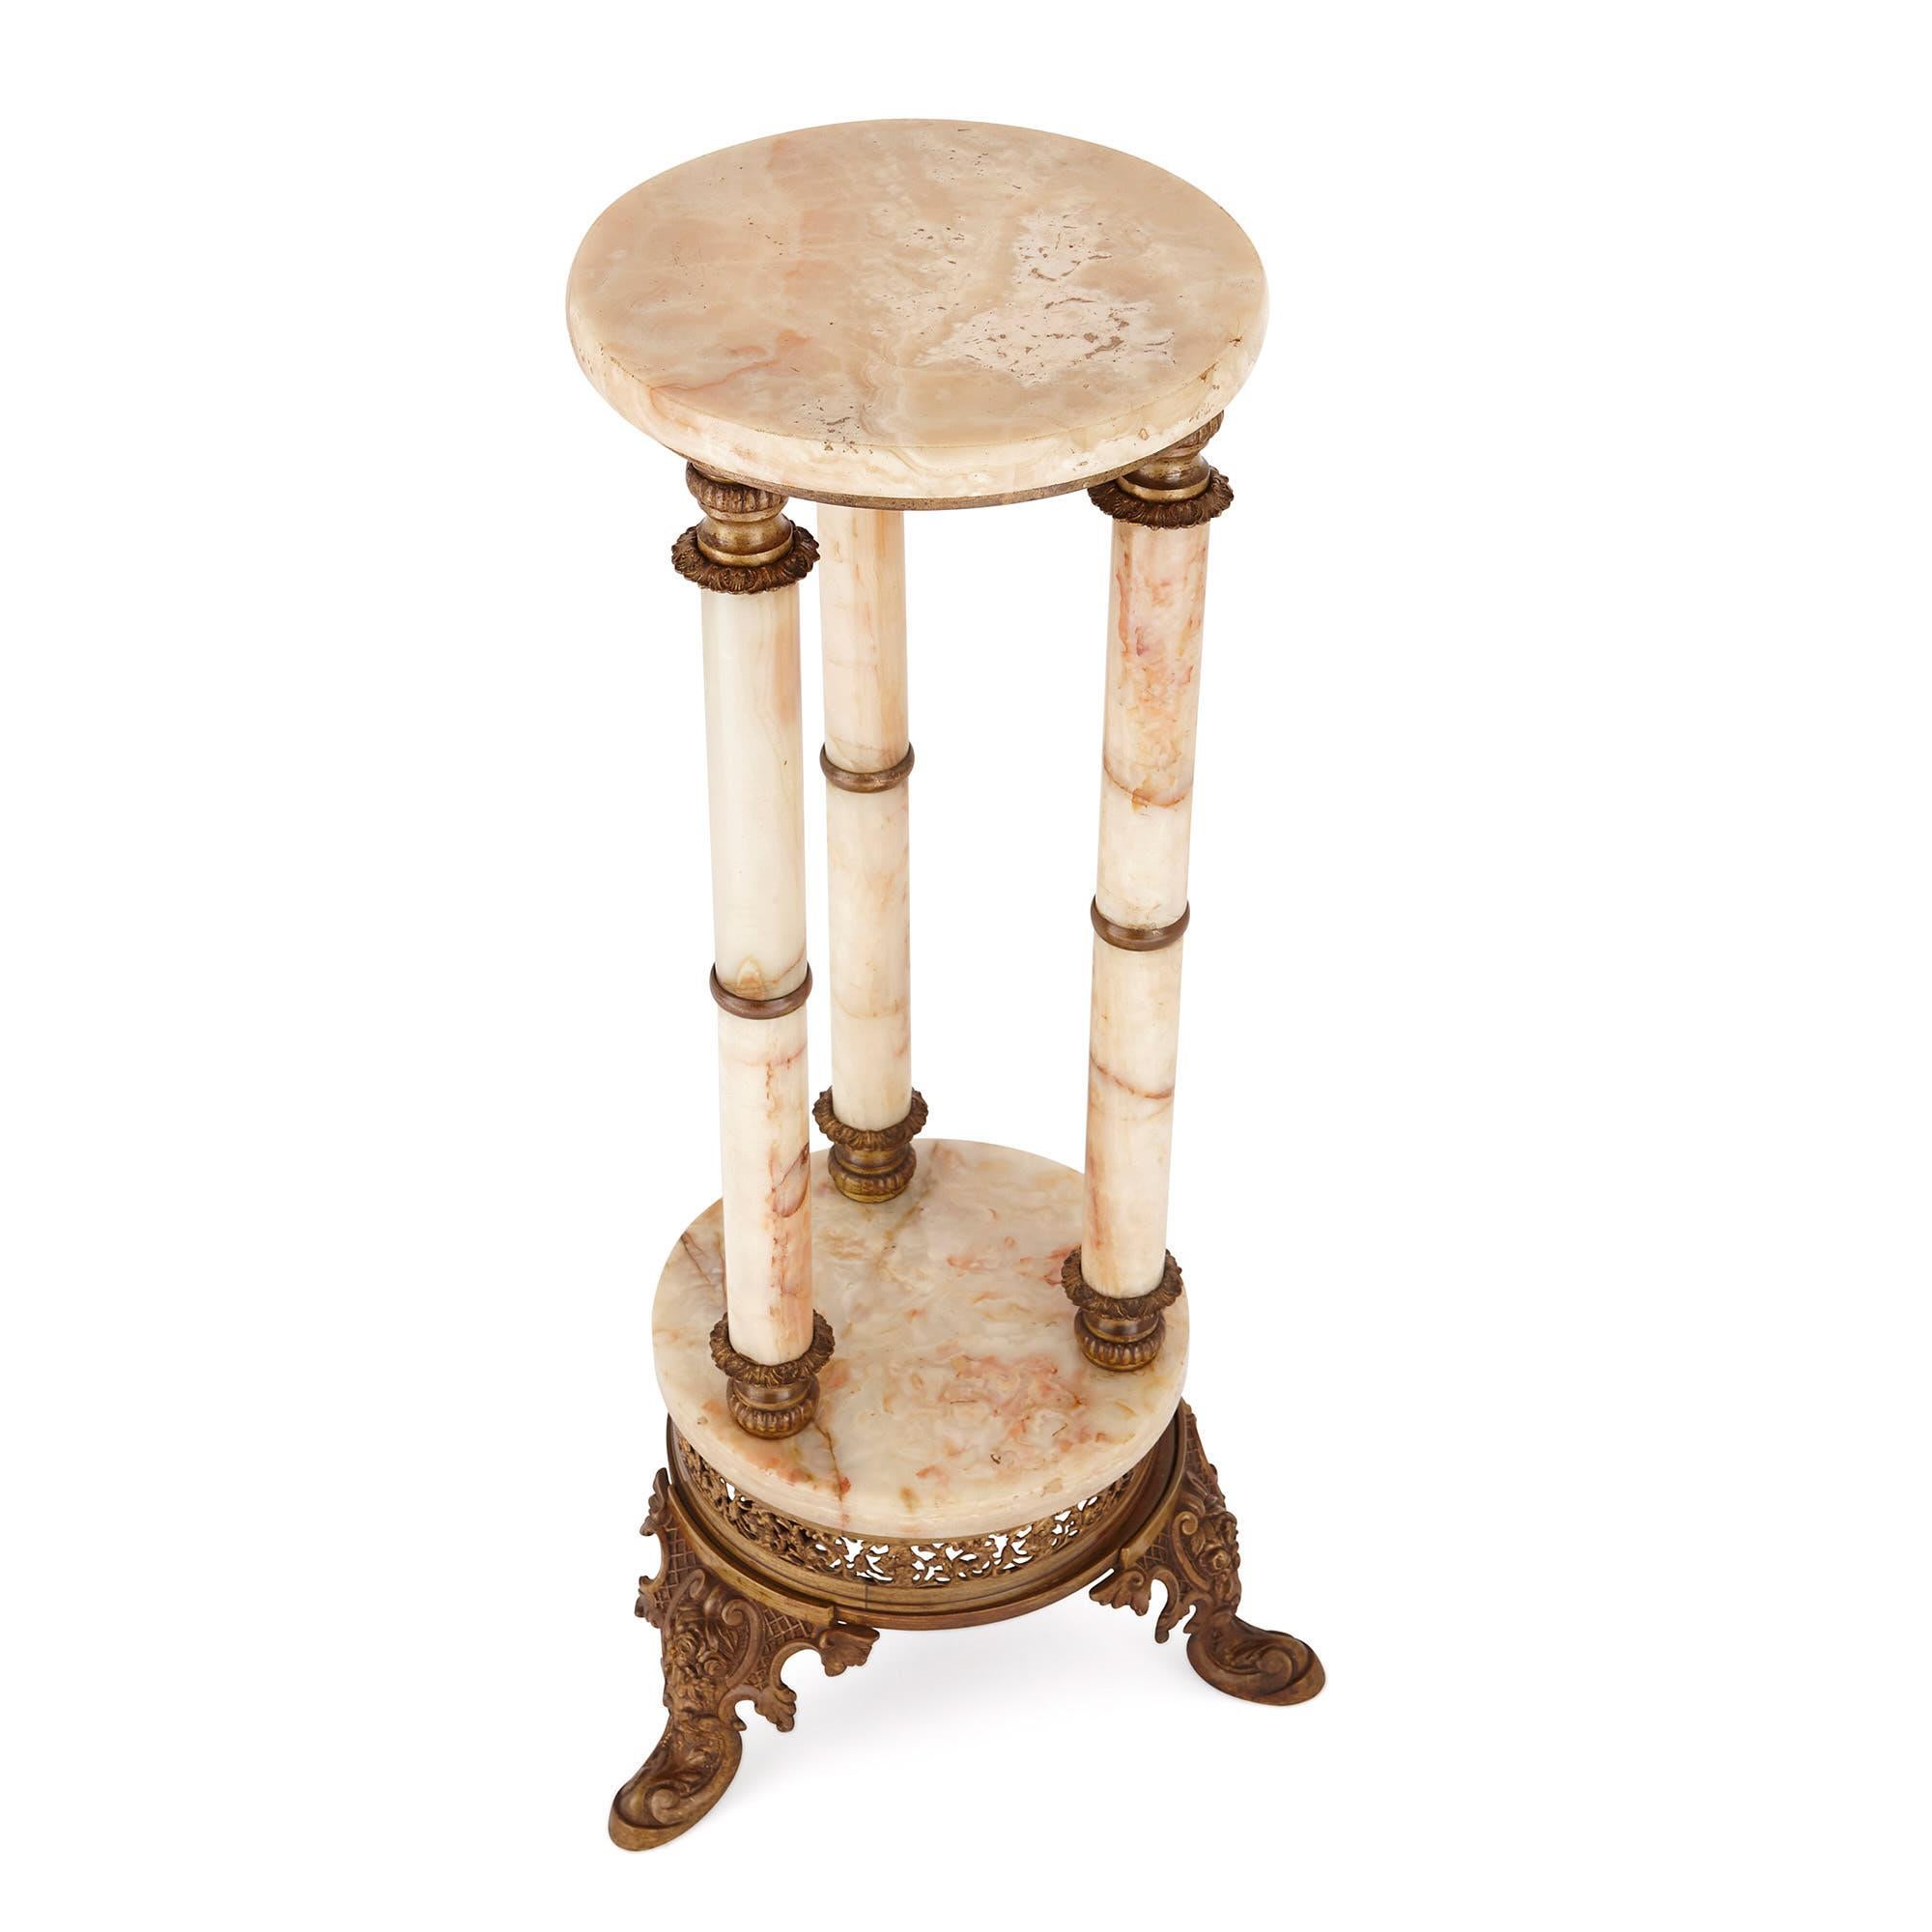 This cream-colored onyx and gilt metal Stand was crafted in France in the late 19th century. The piece features a circular onyx top, with a gilt metal base, which is supported on three columns. These columns have fluted and frilled gilt metal